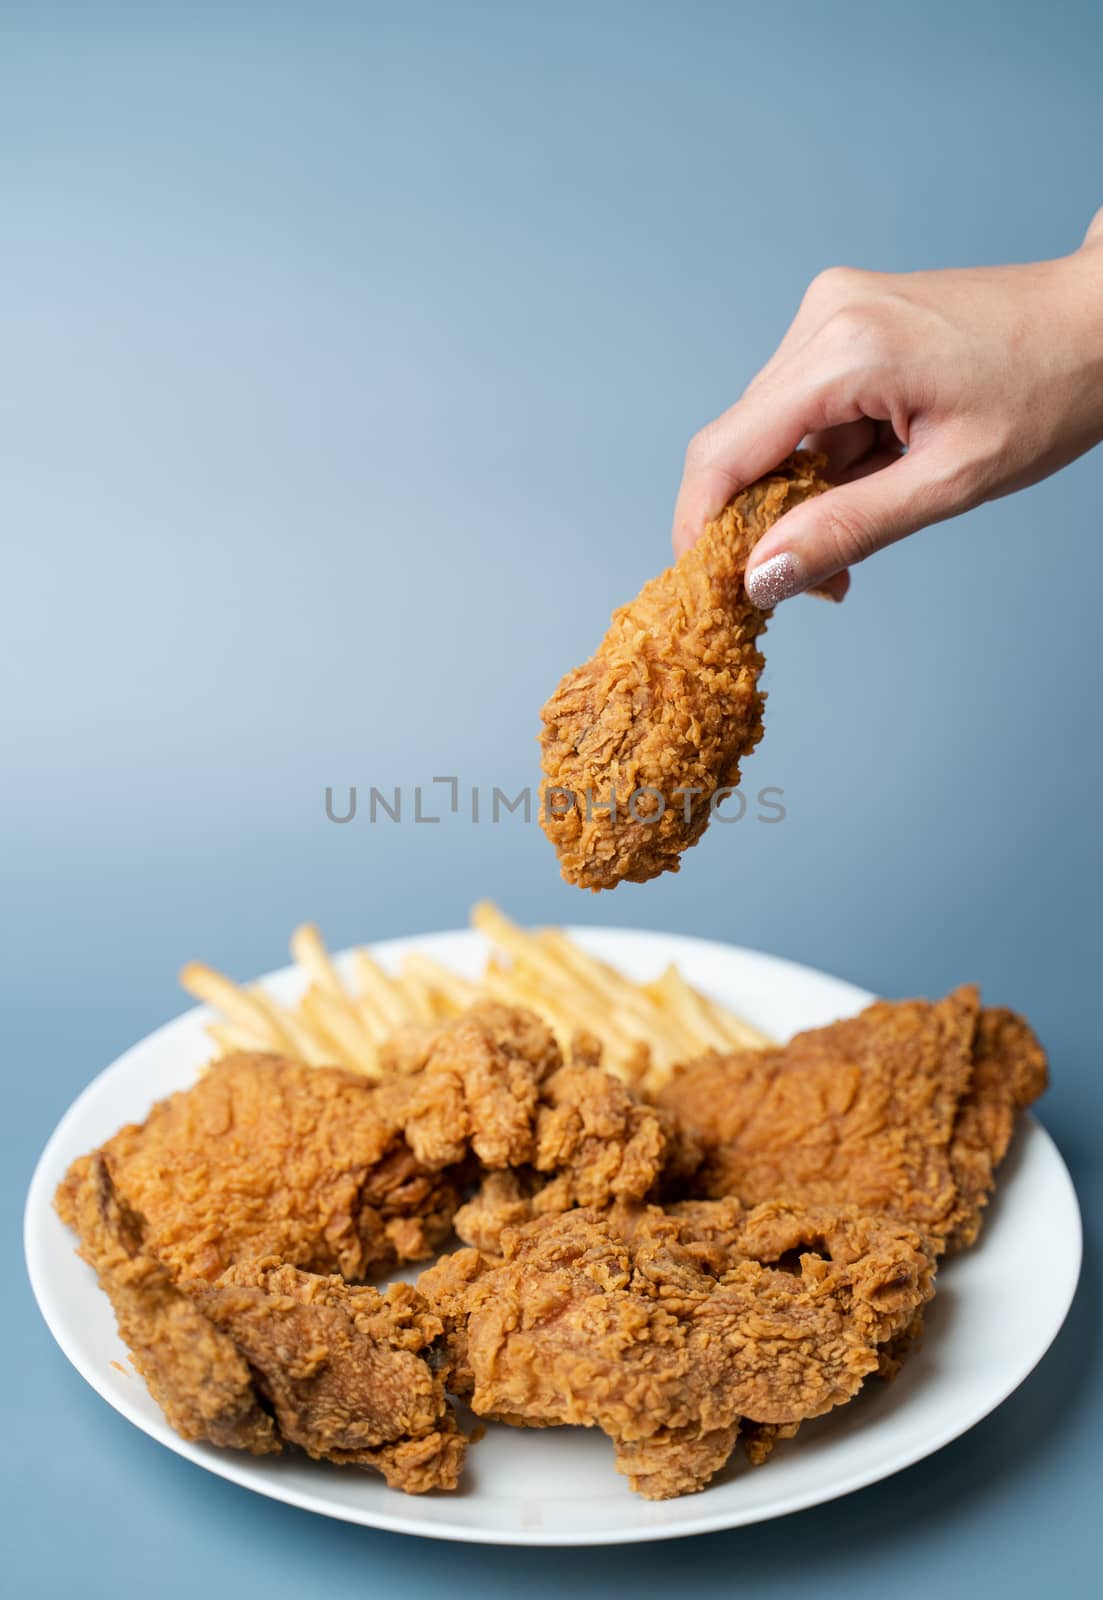 Hand holding drumsticks, crispy fried chicken with french fries in white plate on blue background.